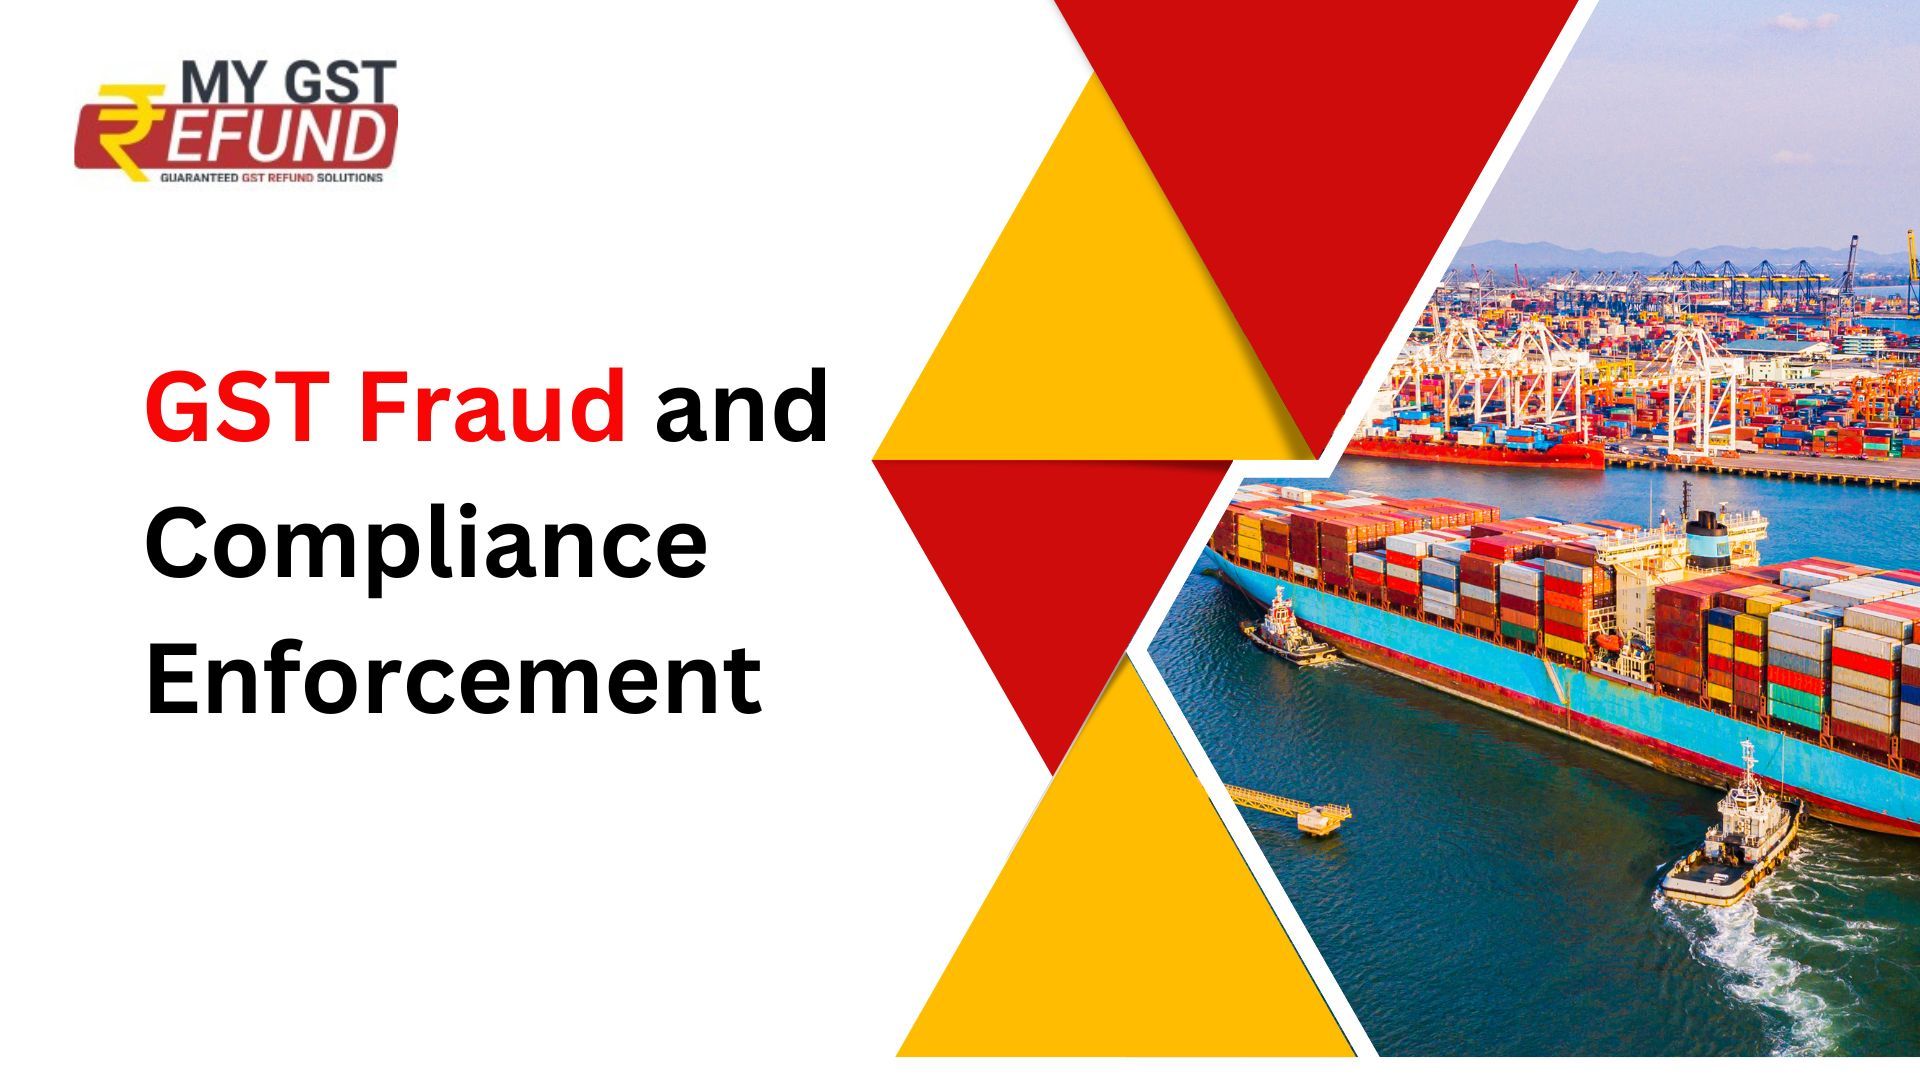 GST Fraud and Compliance Enforcement